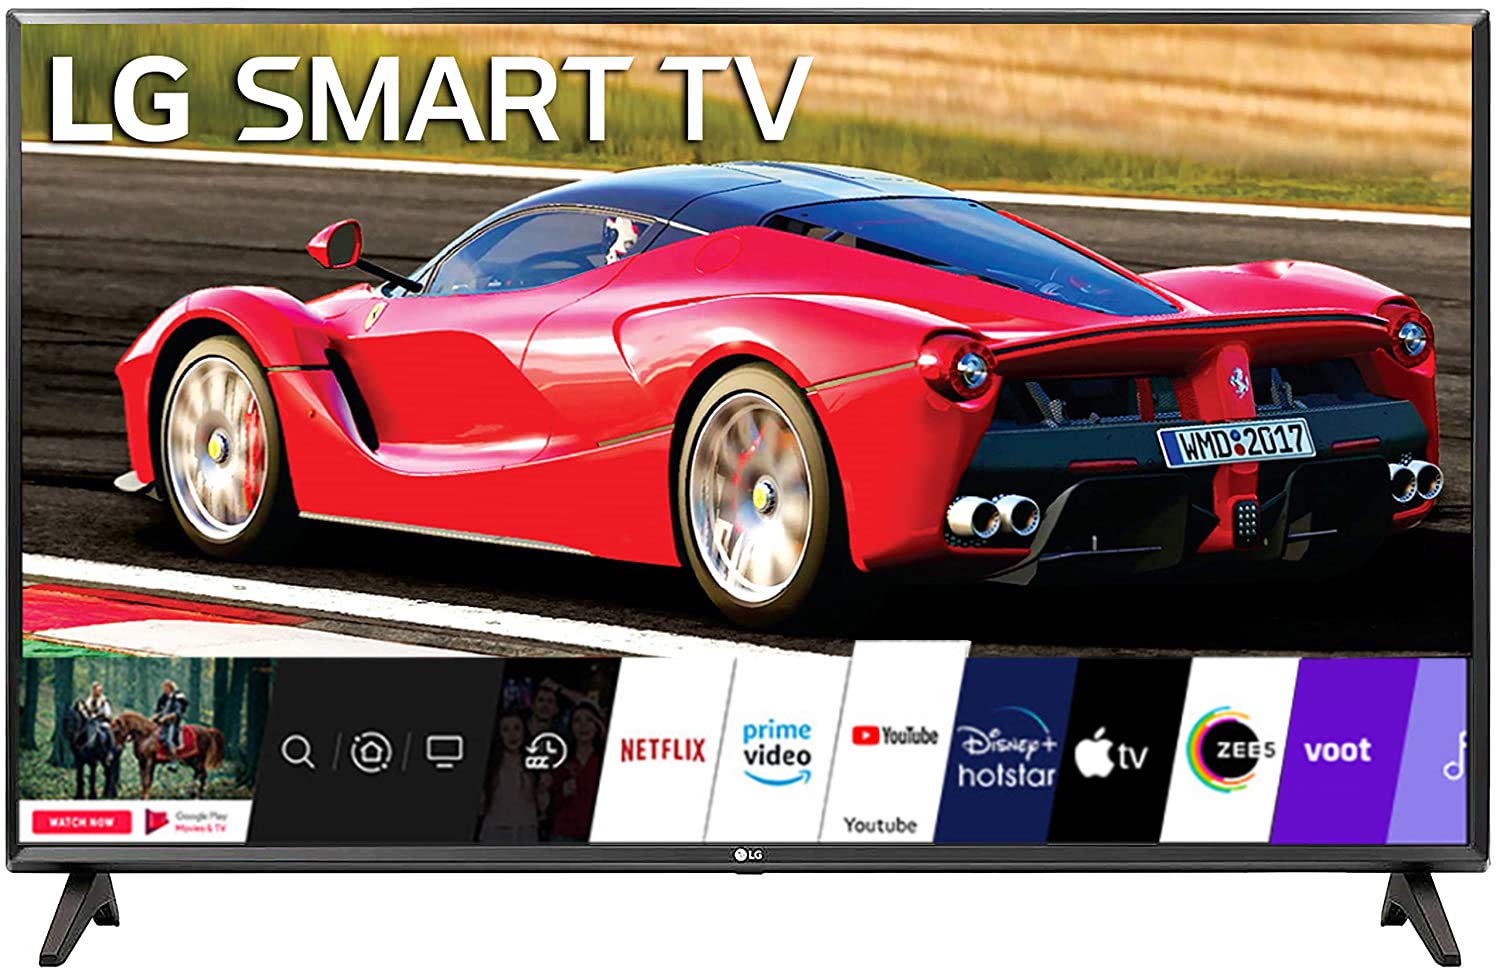 Amazon Festival Sale: Bring home smart TV of MI for less than 14 thousand, as well as a plethora of offers on other branded smart TVs